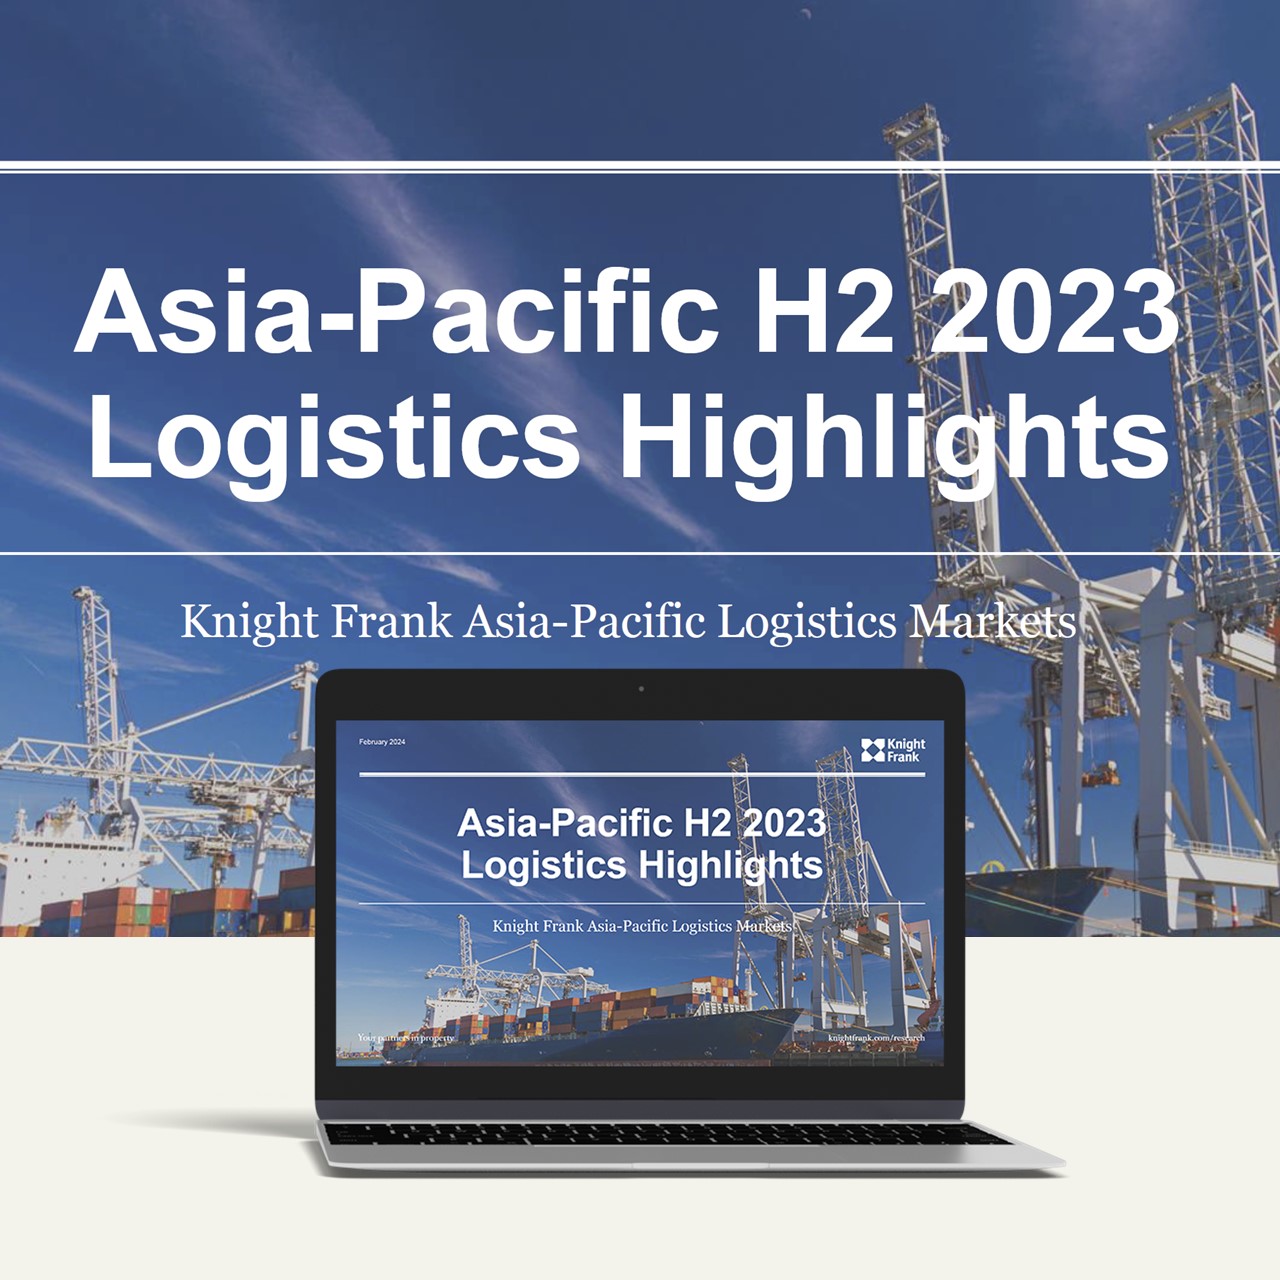 Knight Frank Asia-Pacific H2 2023 Logistics Highlights